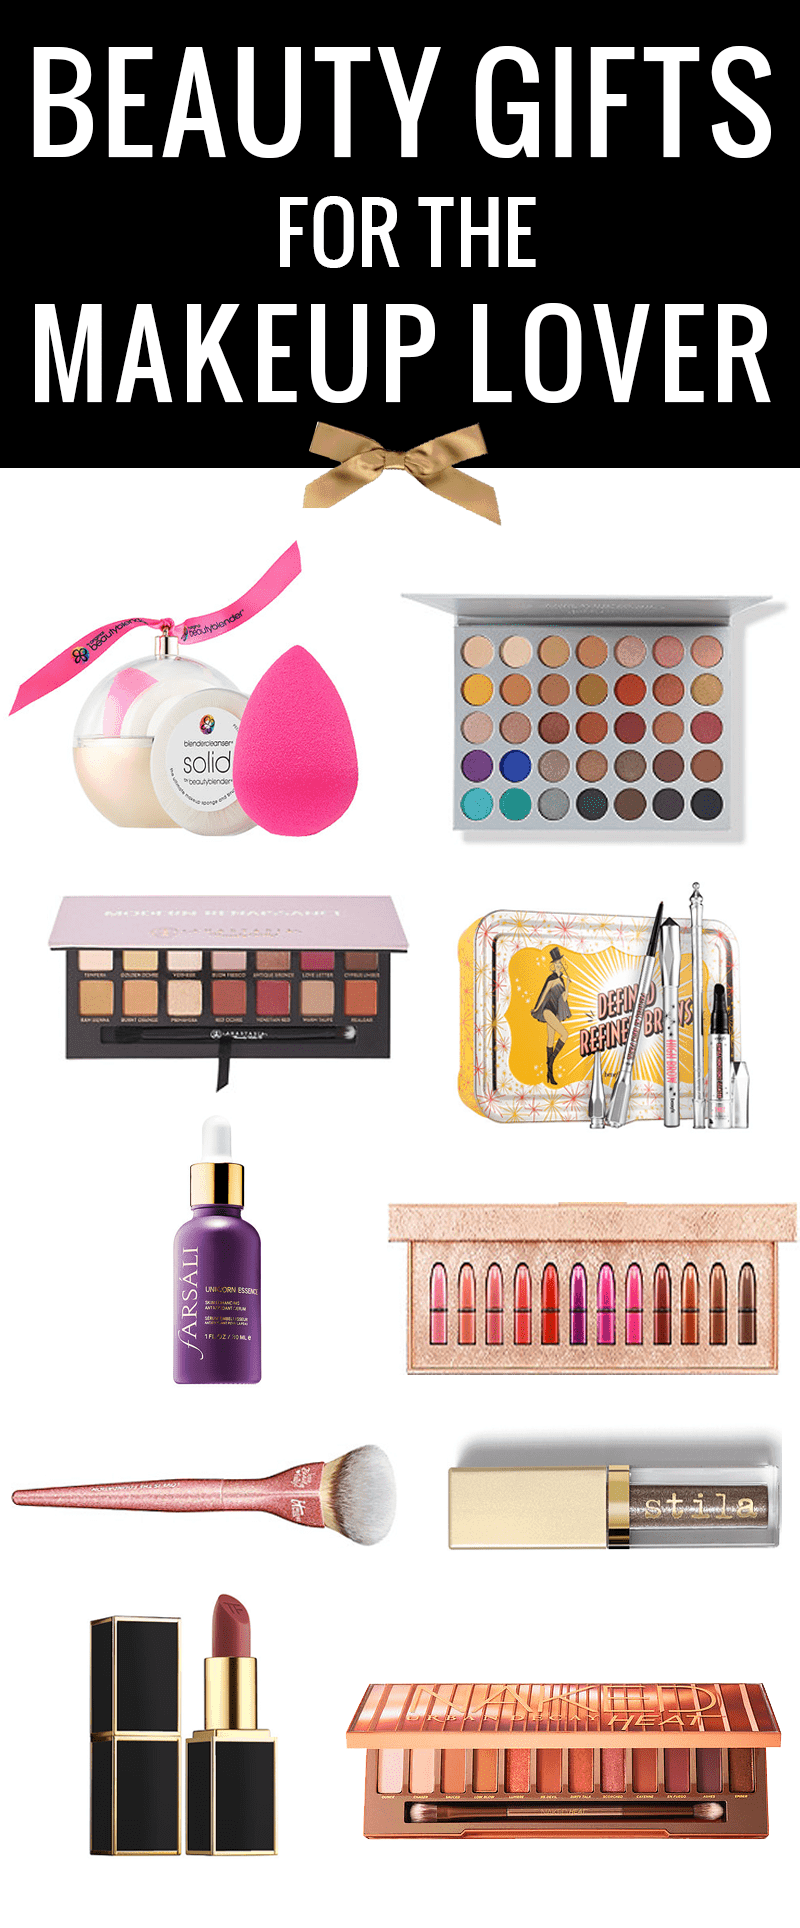 Beauty gifts for her - any makeup lover will love these holiday gift ideas! #holidaygifts #giftideas #giftguide #gifts #shopping #makeup #beautyblogger #beauty #sephora #ulta